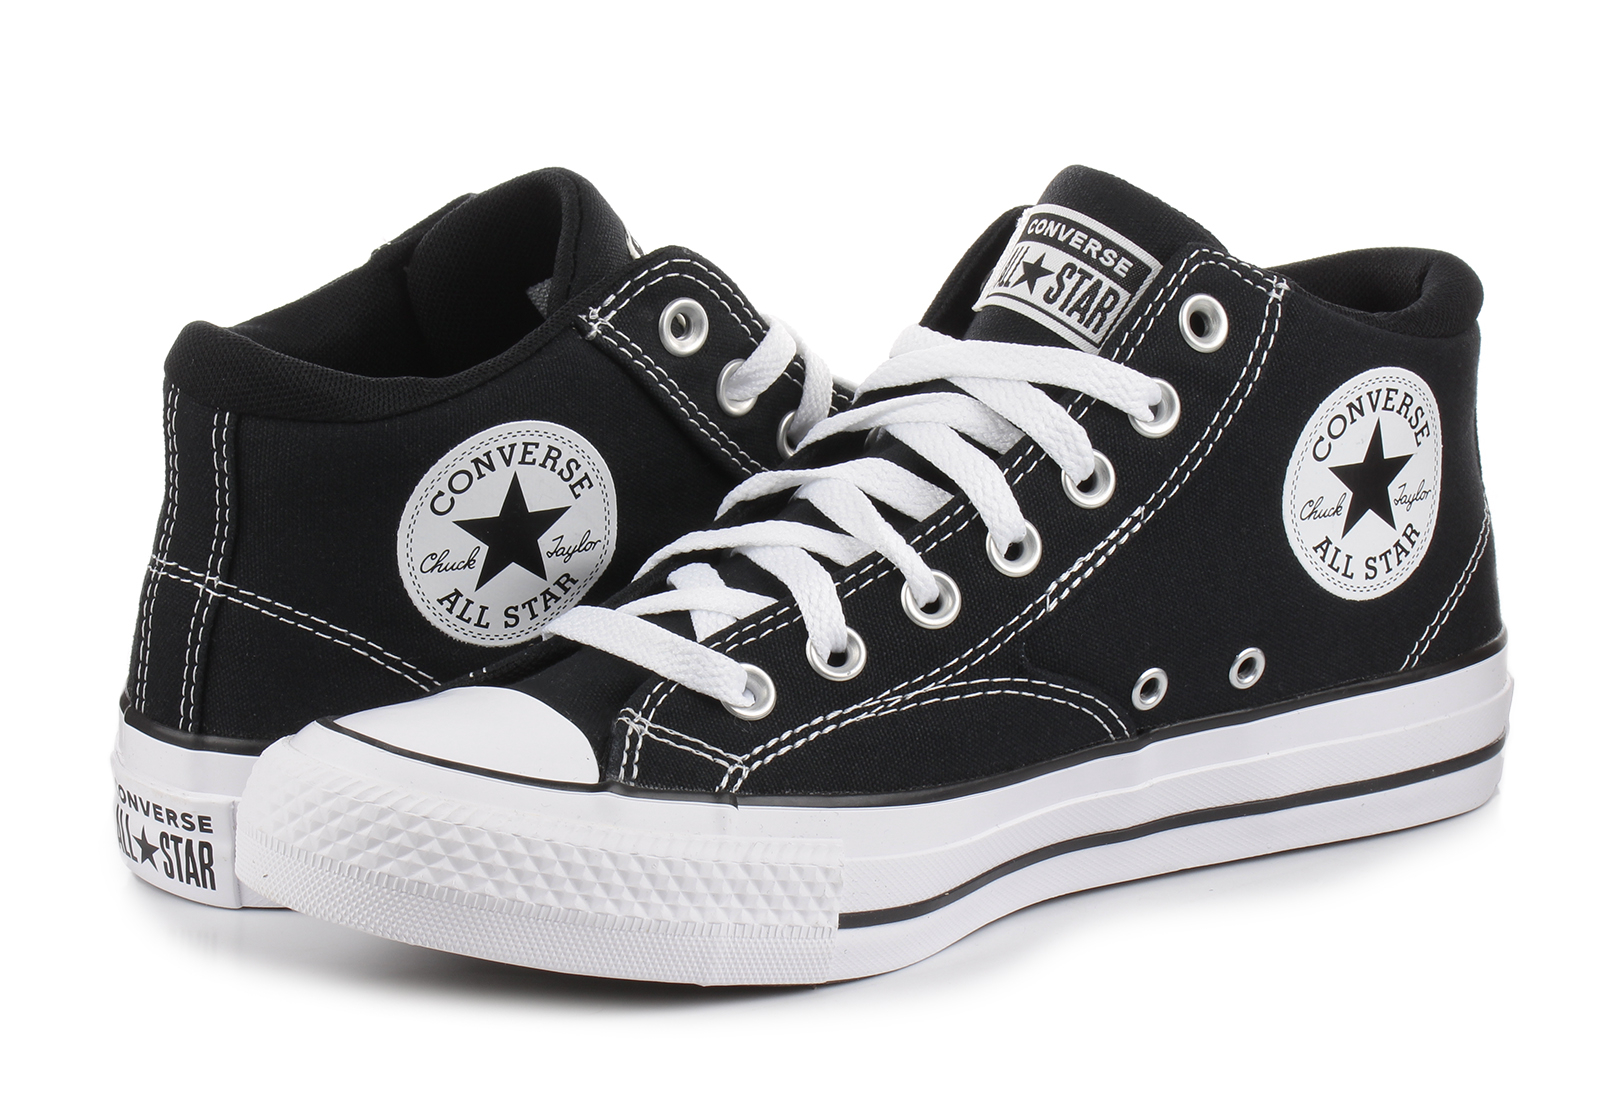 Converse High trainers - Chuck - Star shoes - and Street shop Online sneakers, A00811C All for Taylor Malden boots